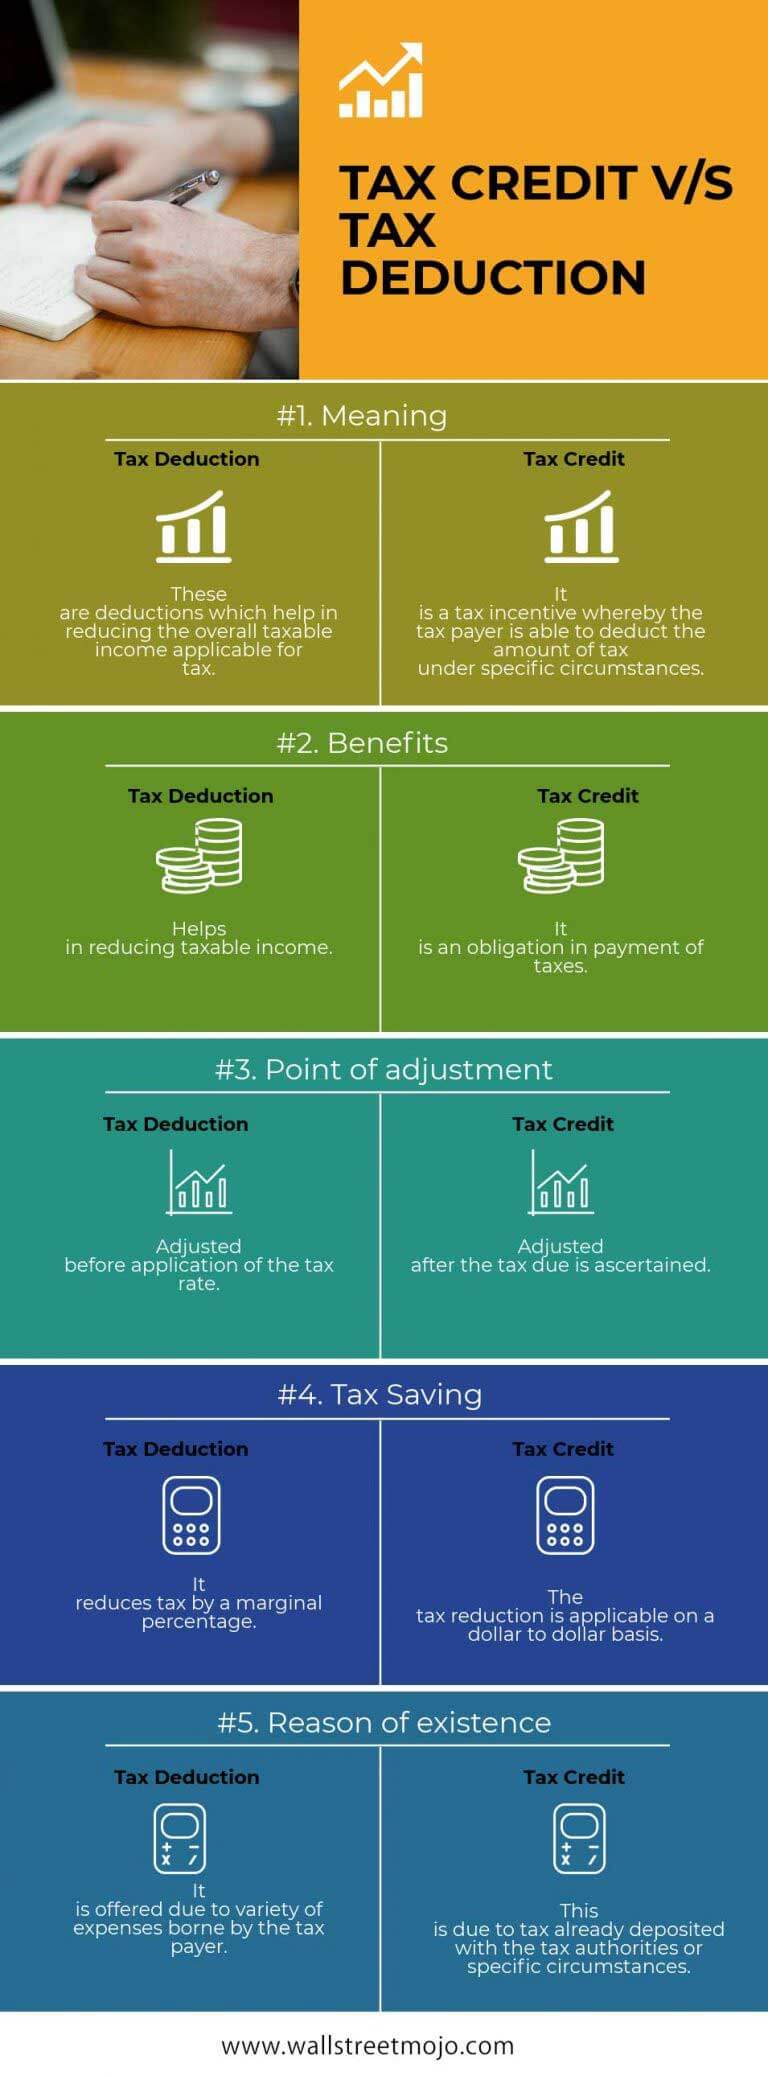 How Does A Tax Deduction Differ From A Tax Credit